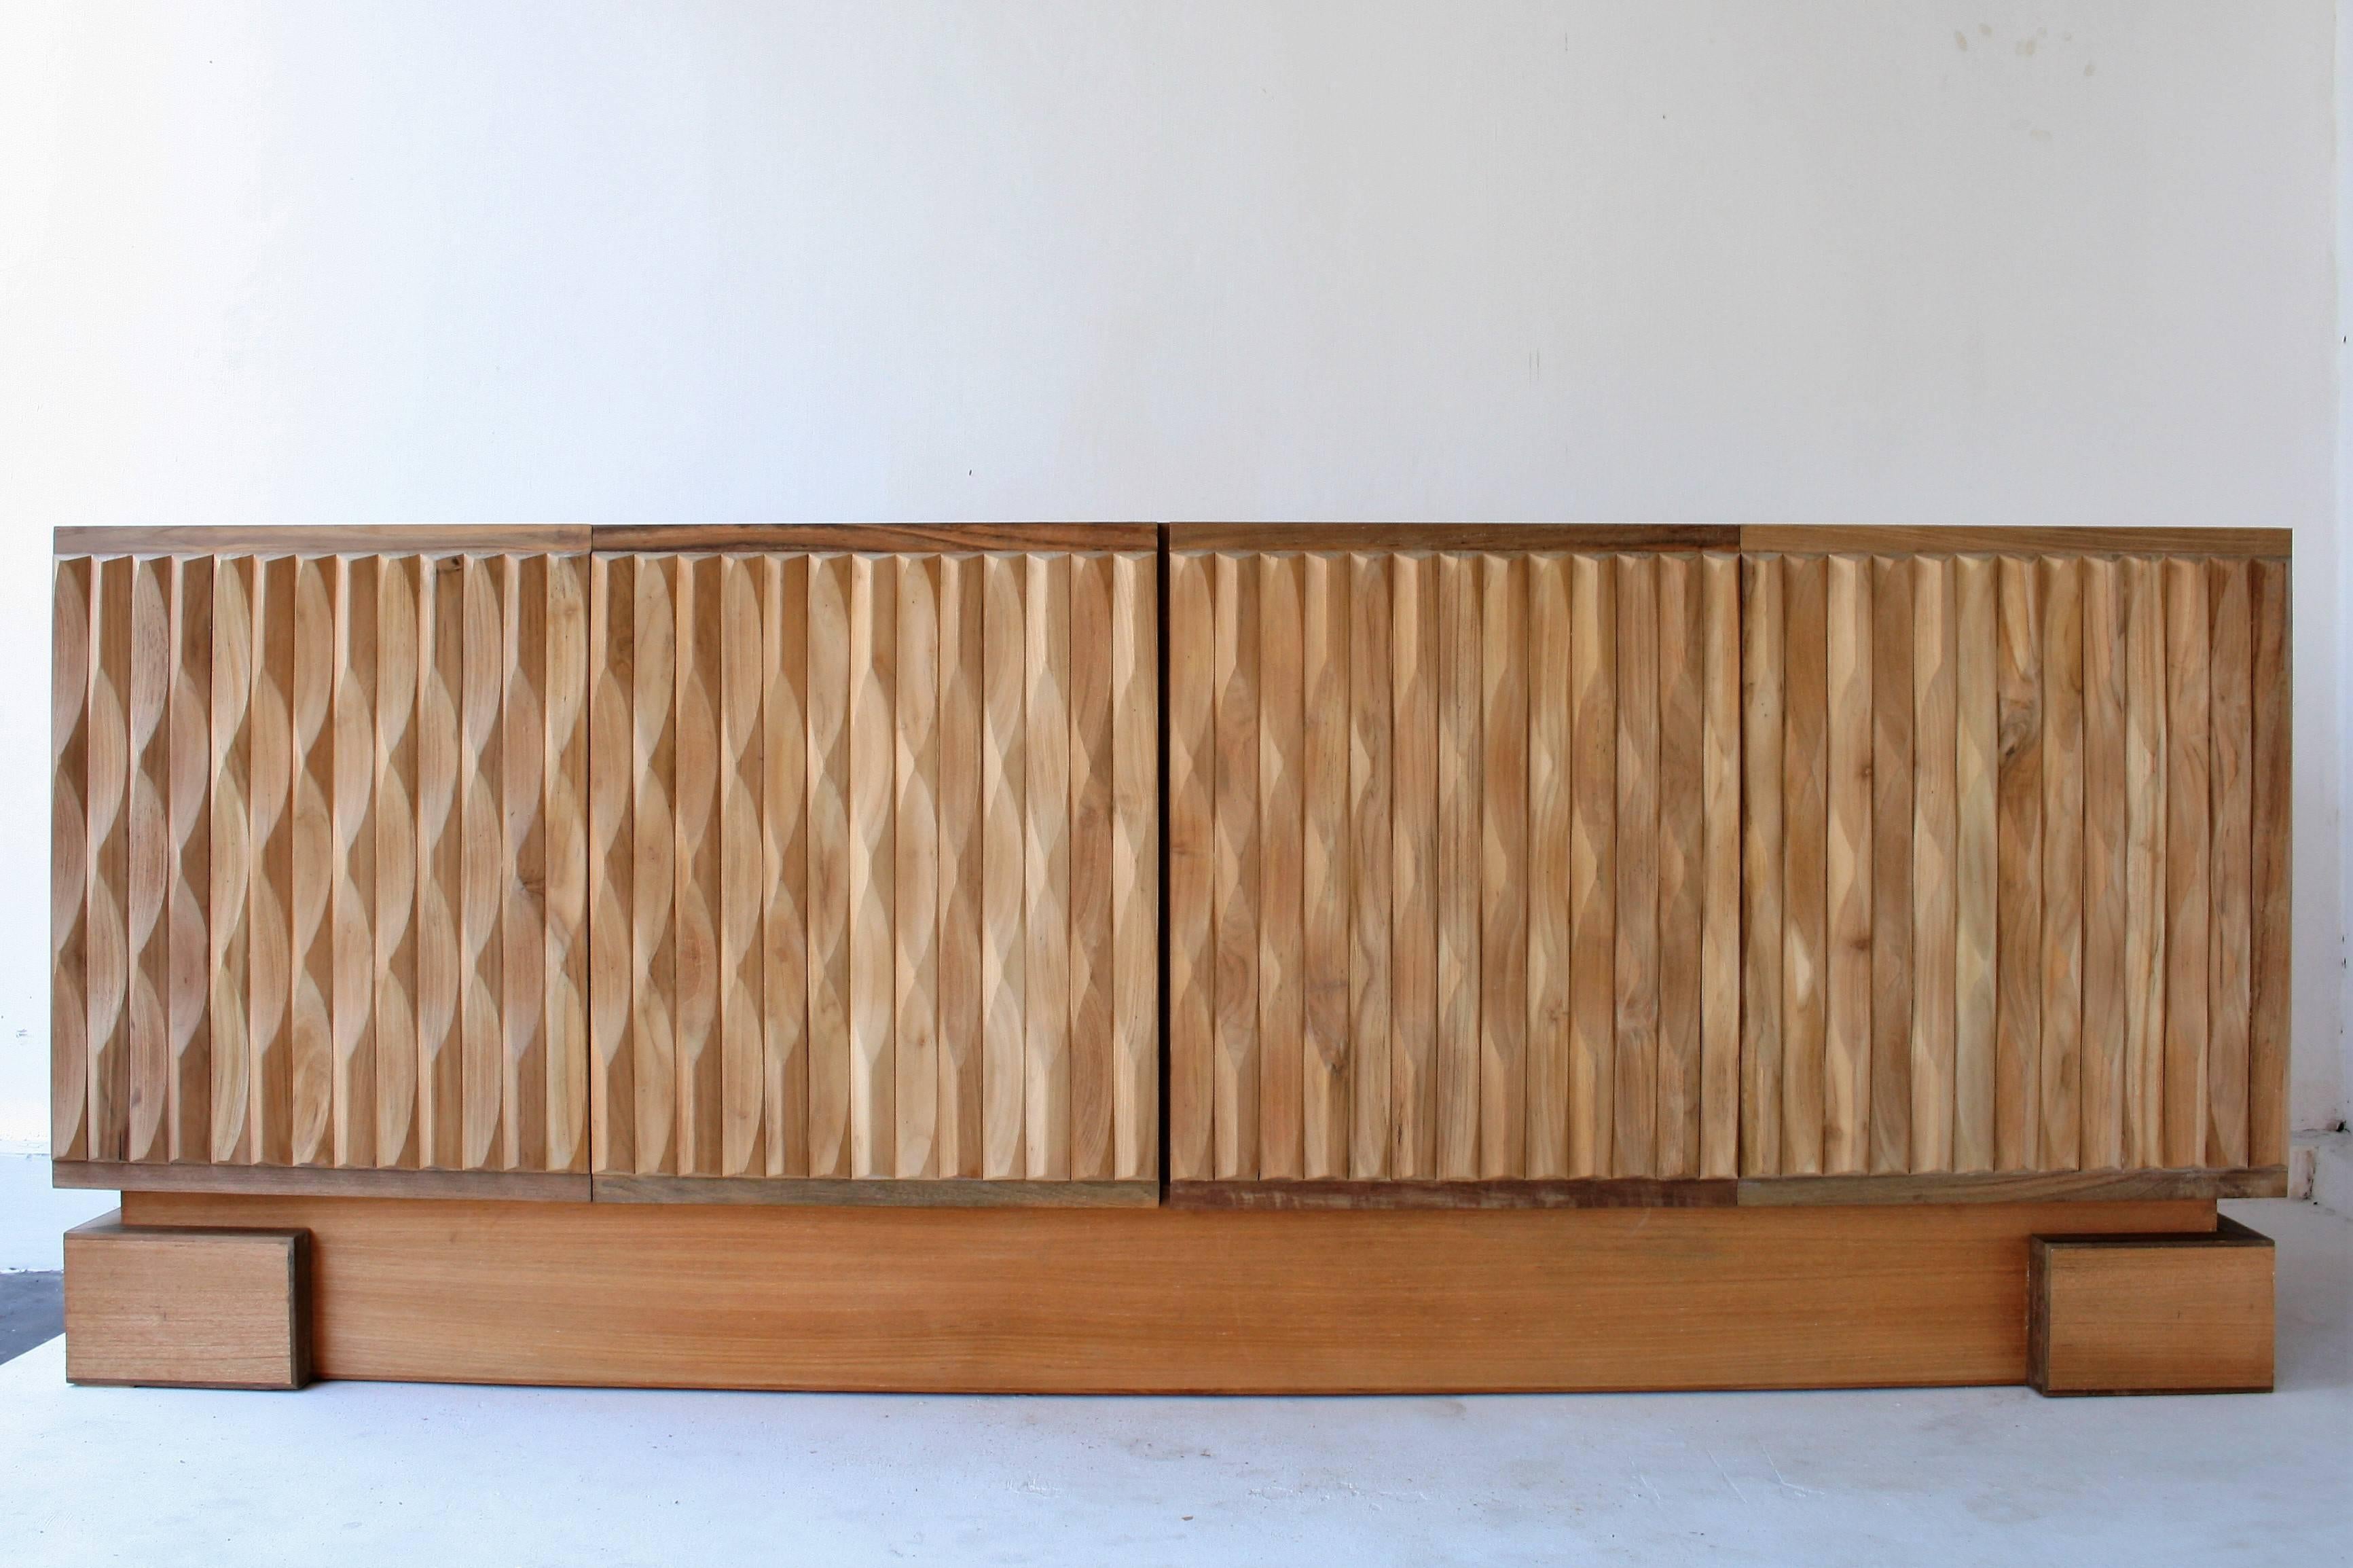 This sculptural sideboard has solid wooden graphic panels. We cleaned and stripped the doors completely and finished them with a natural oil. This cabinet looks fantastic, with only minor wear. Italian Prameta hinges.
This sideboard is a real eye